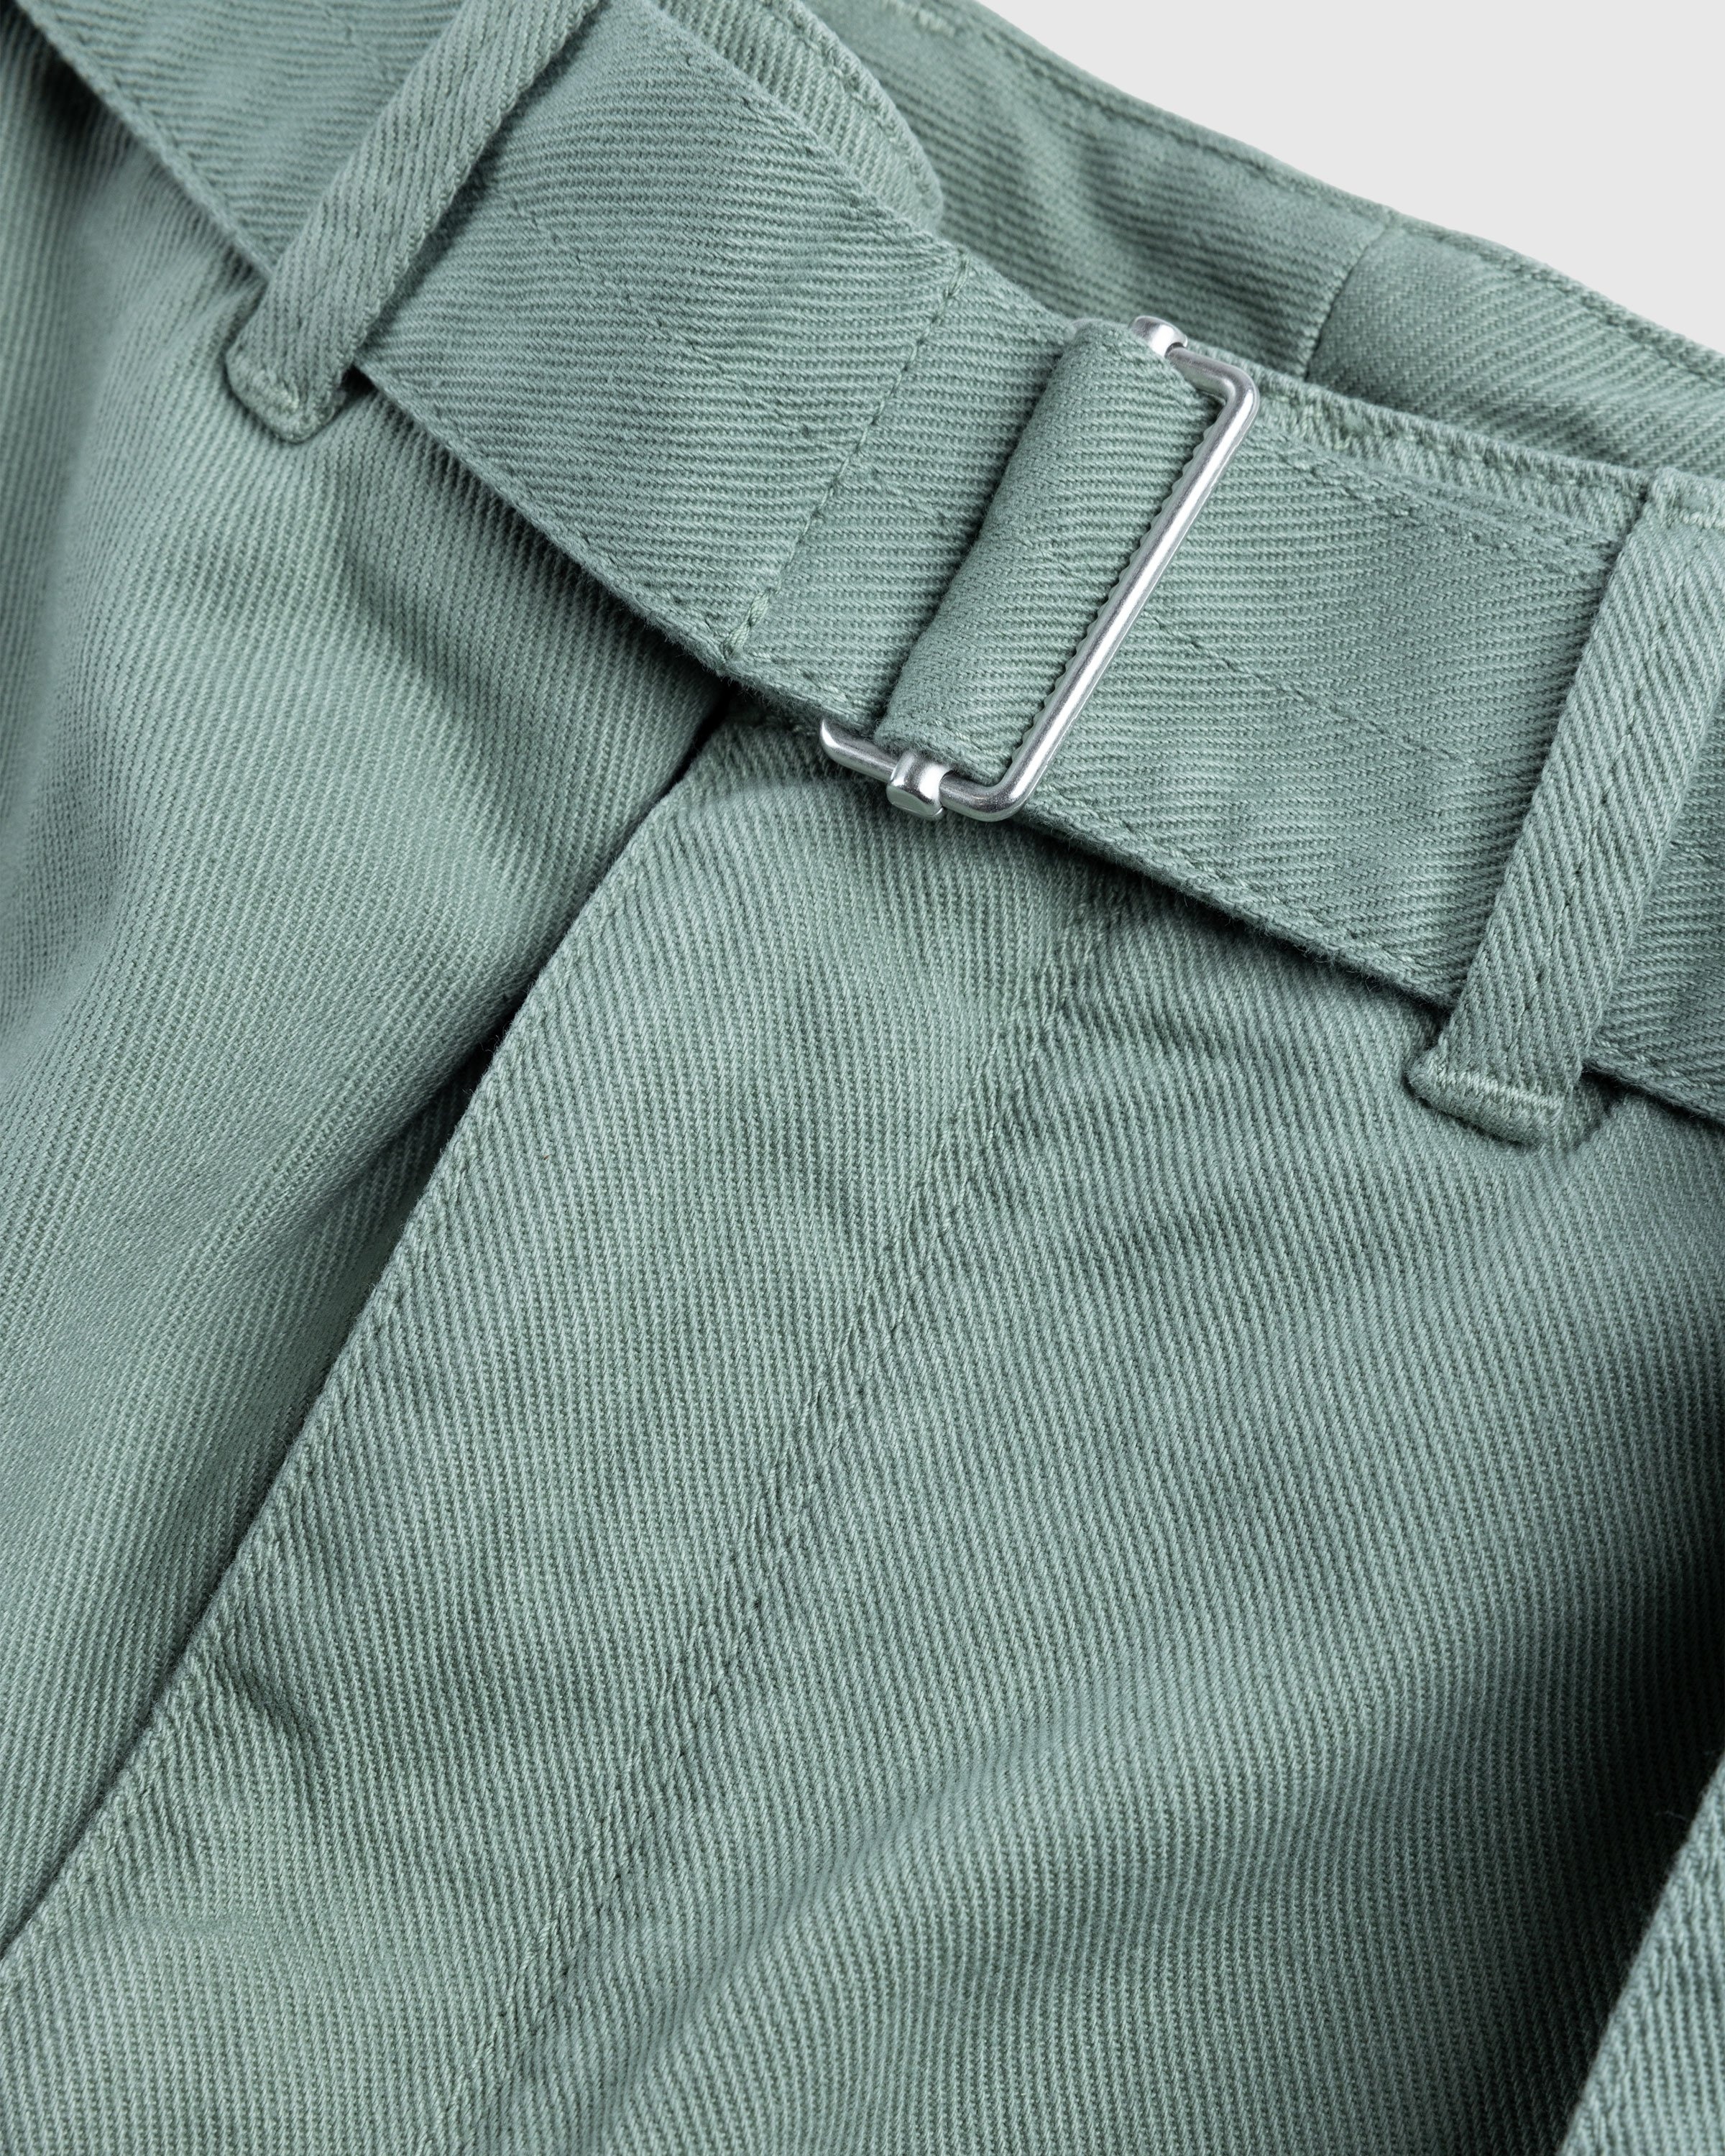 Lemaire – MILITARY PANTS | Highsnobiety Shop